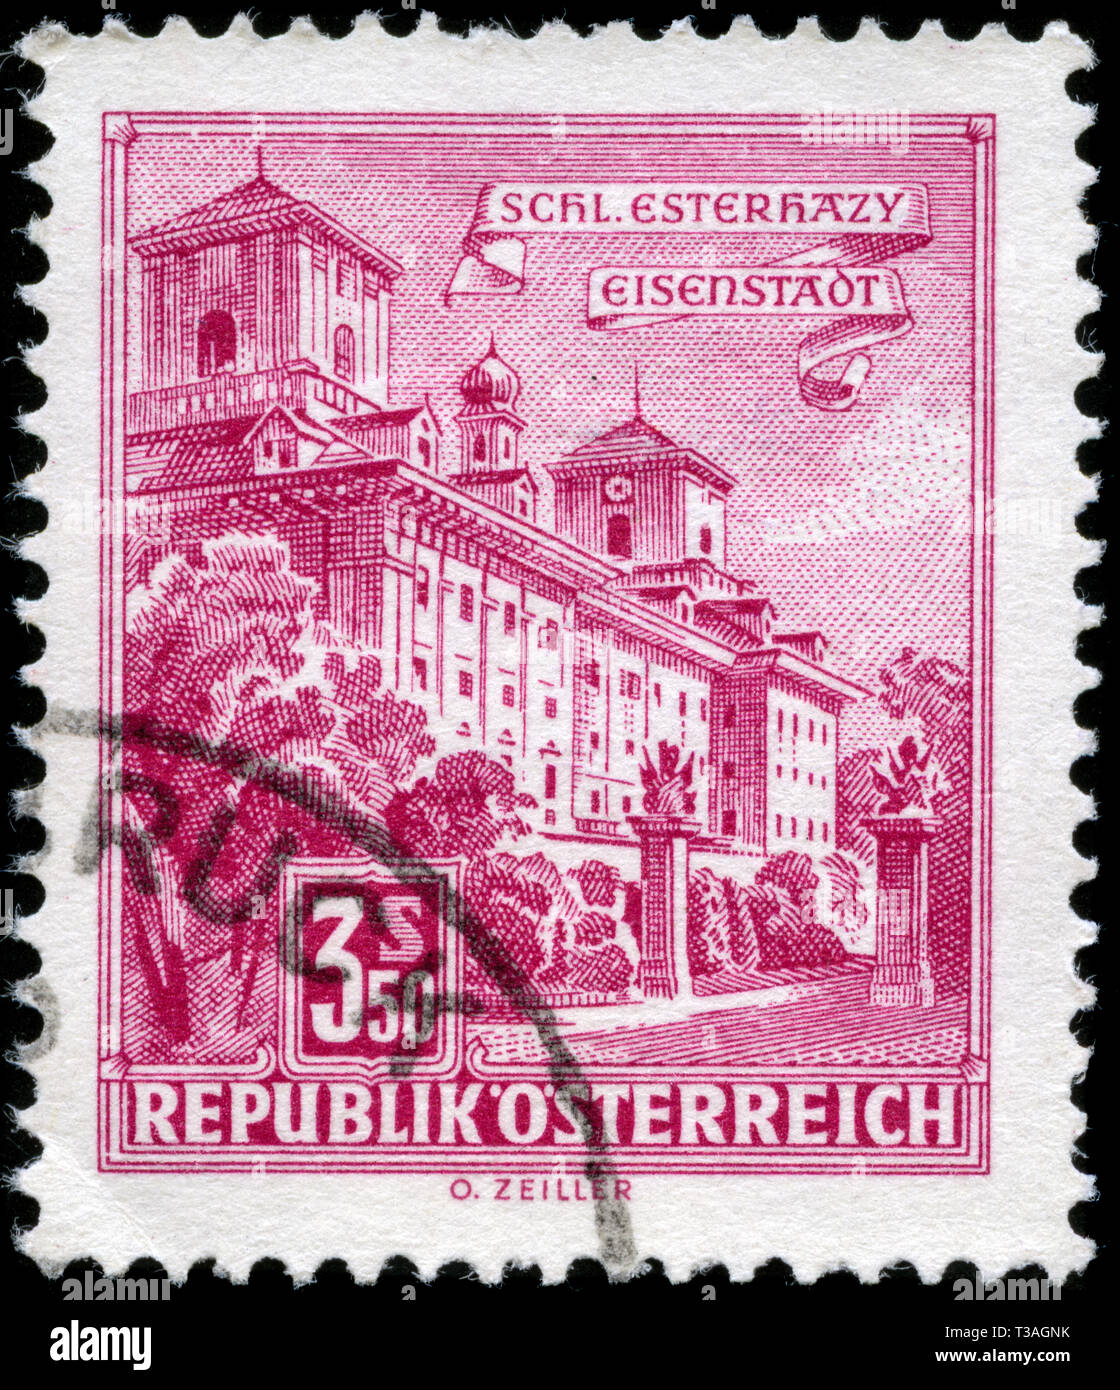 Postage stamp from Austria in the Buildings series issued in 1962 Stock Photo